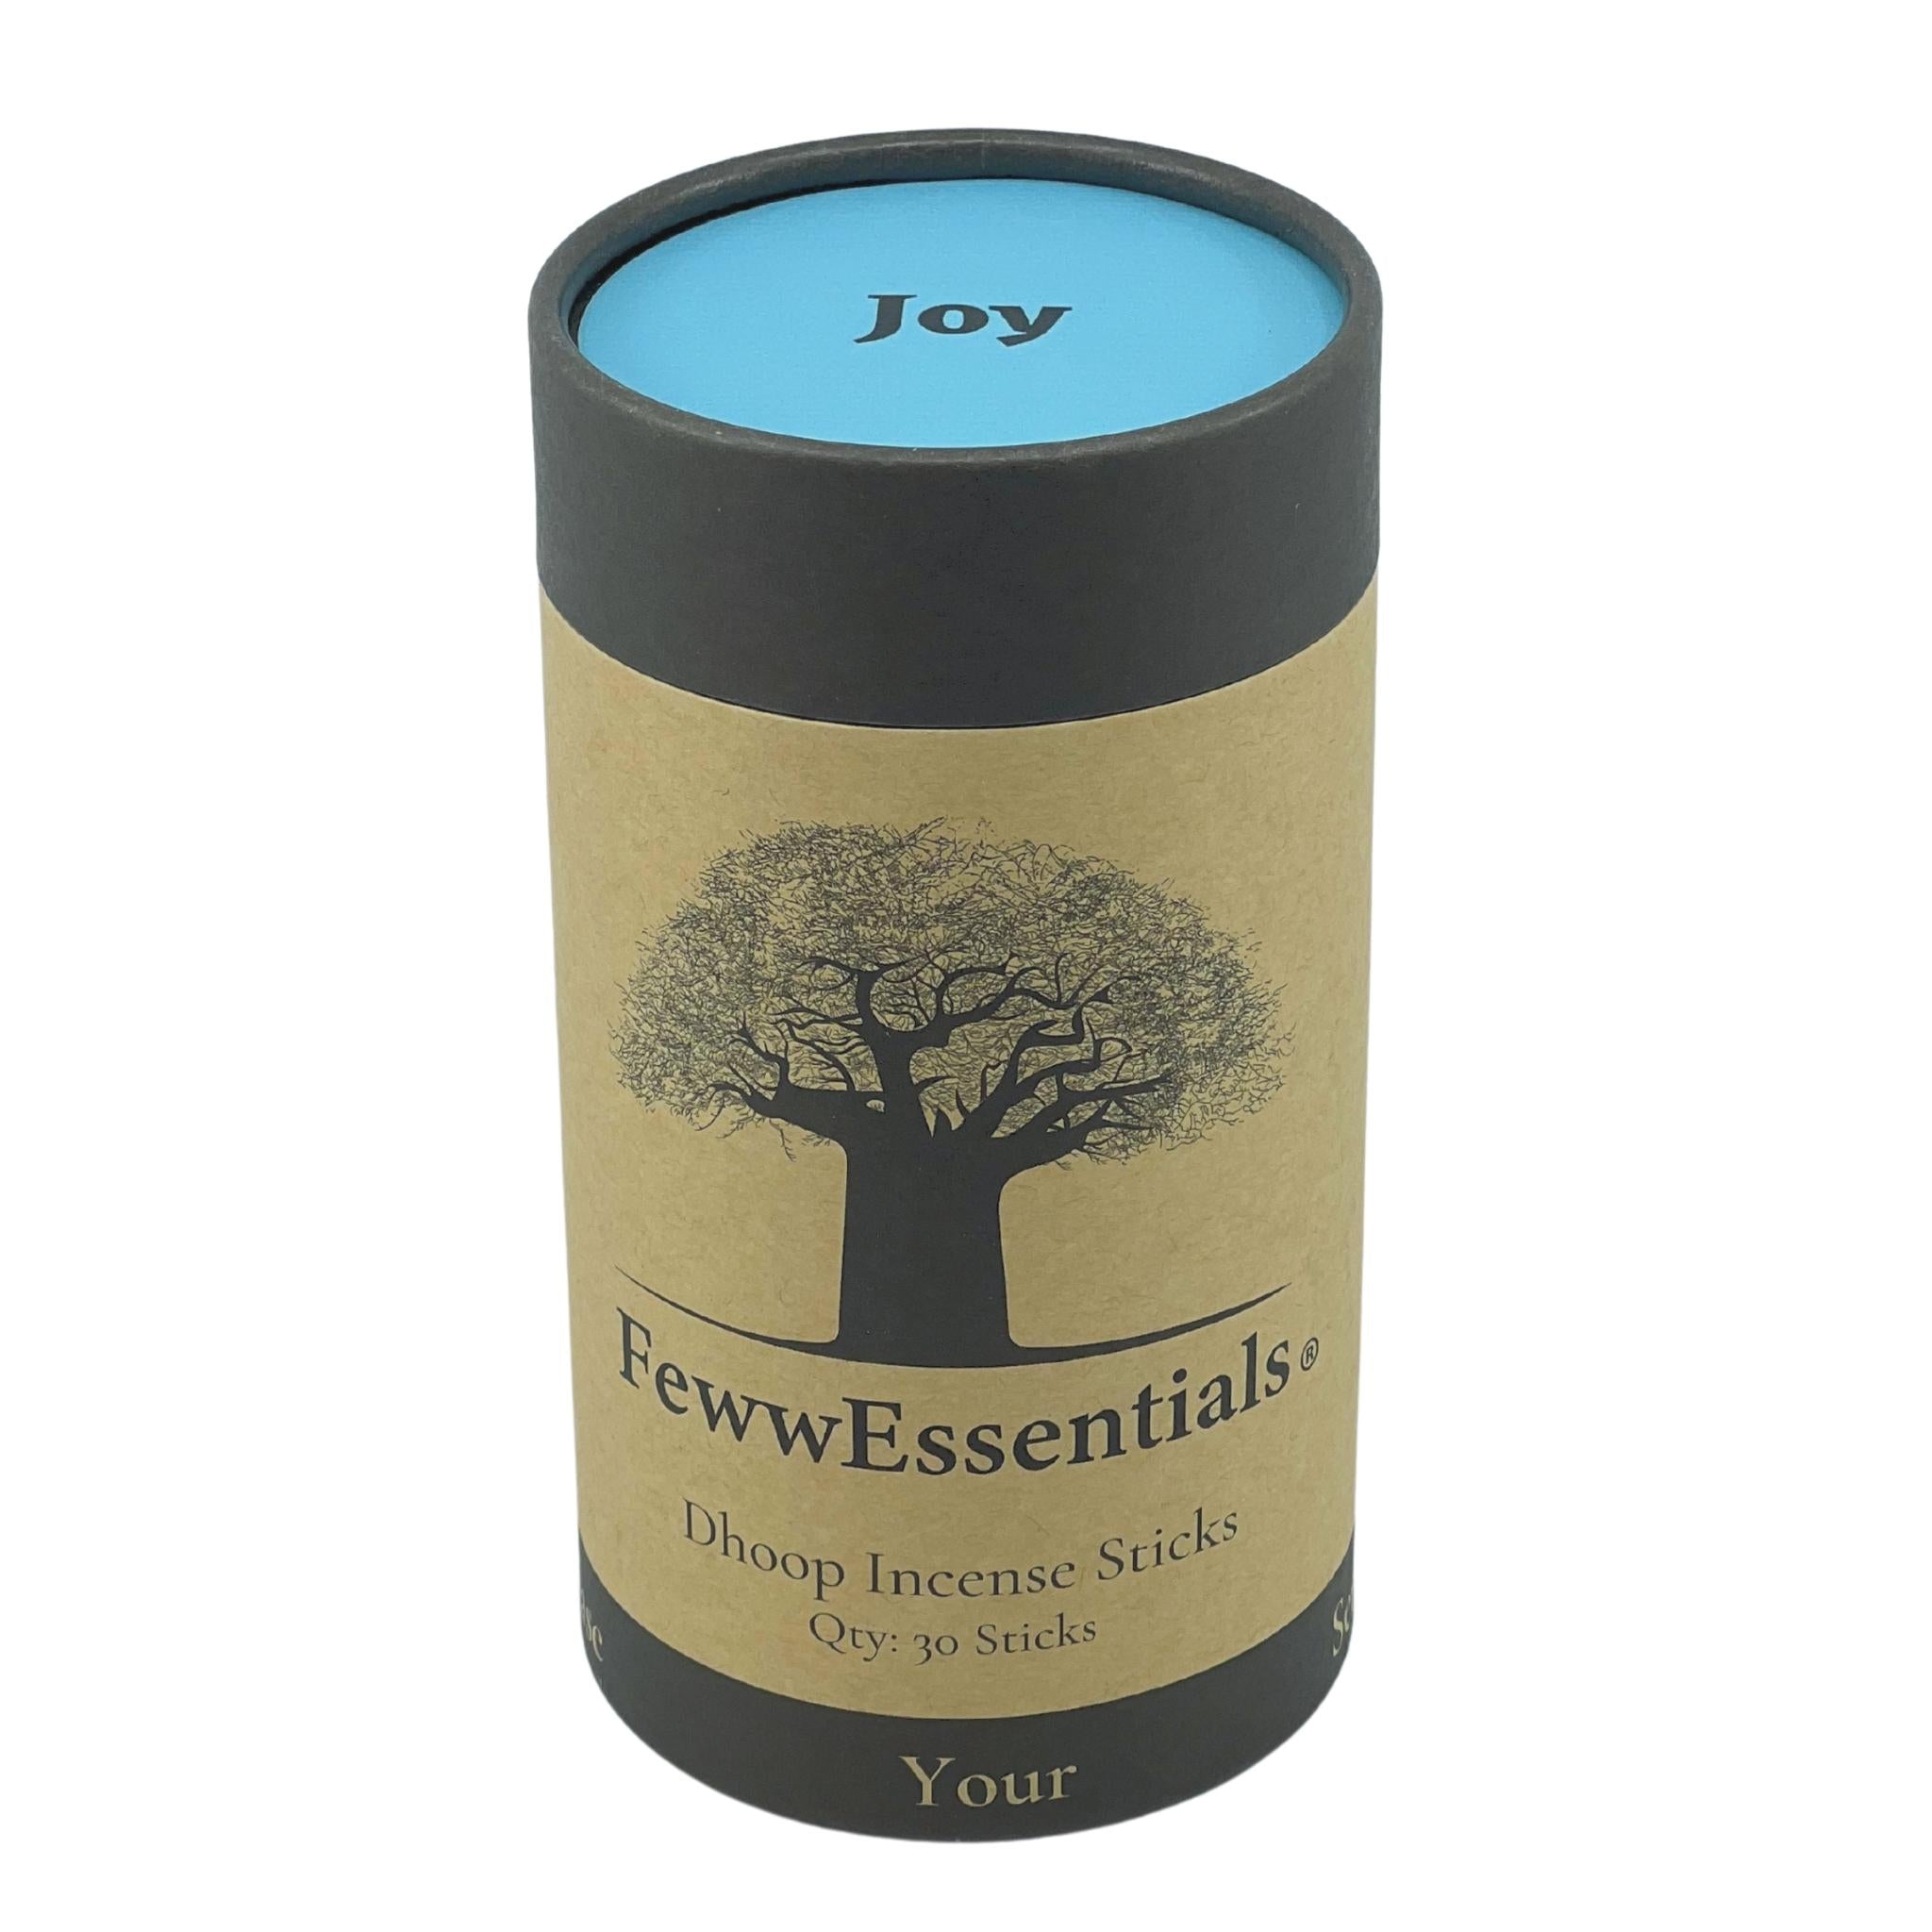 Image of FewwEssentials Dhoop Incense Sticks with the scent name Joy in a Circular Kraft Brown Box with Sky Blue Lid